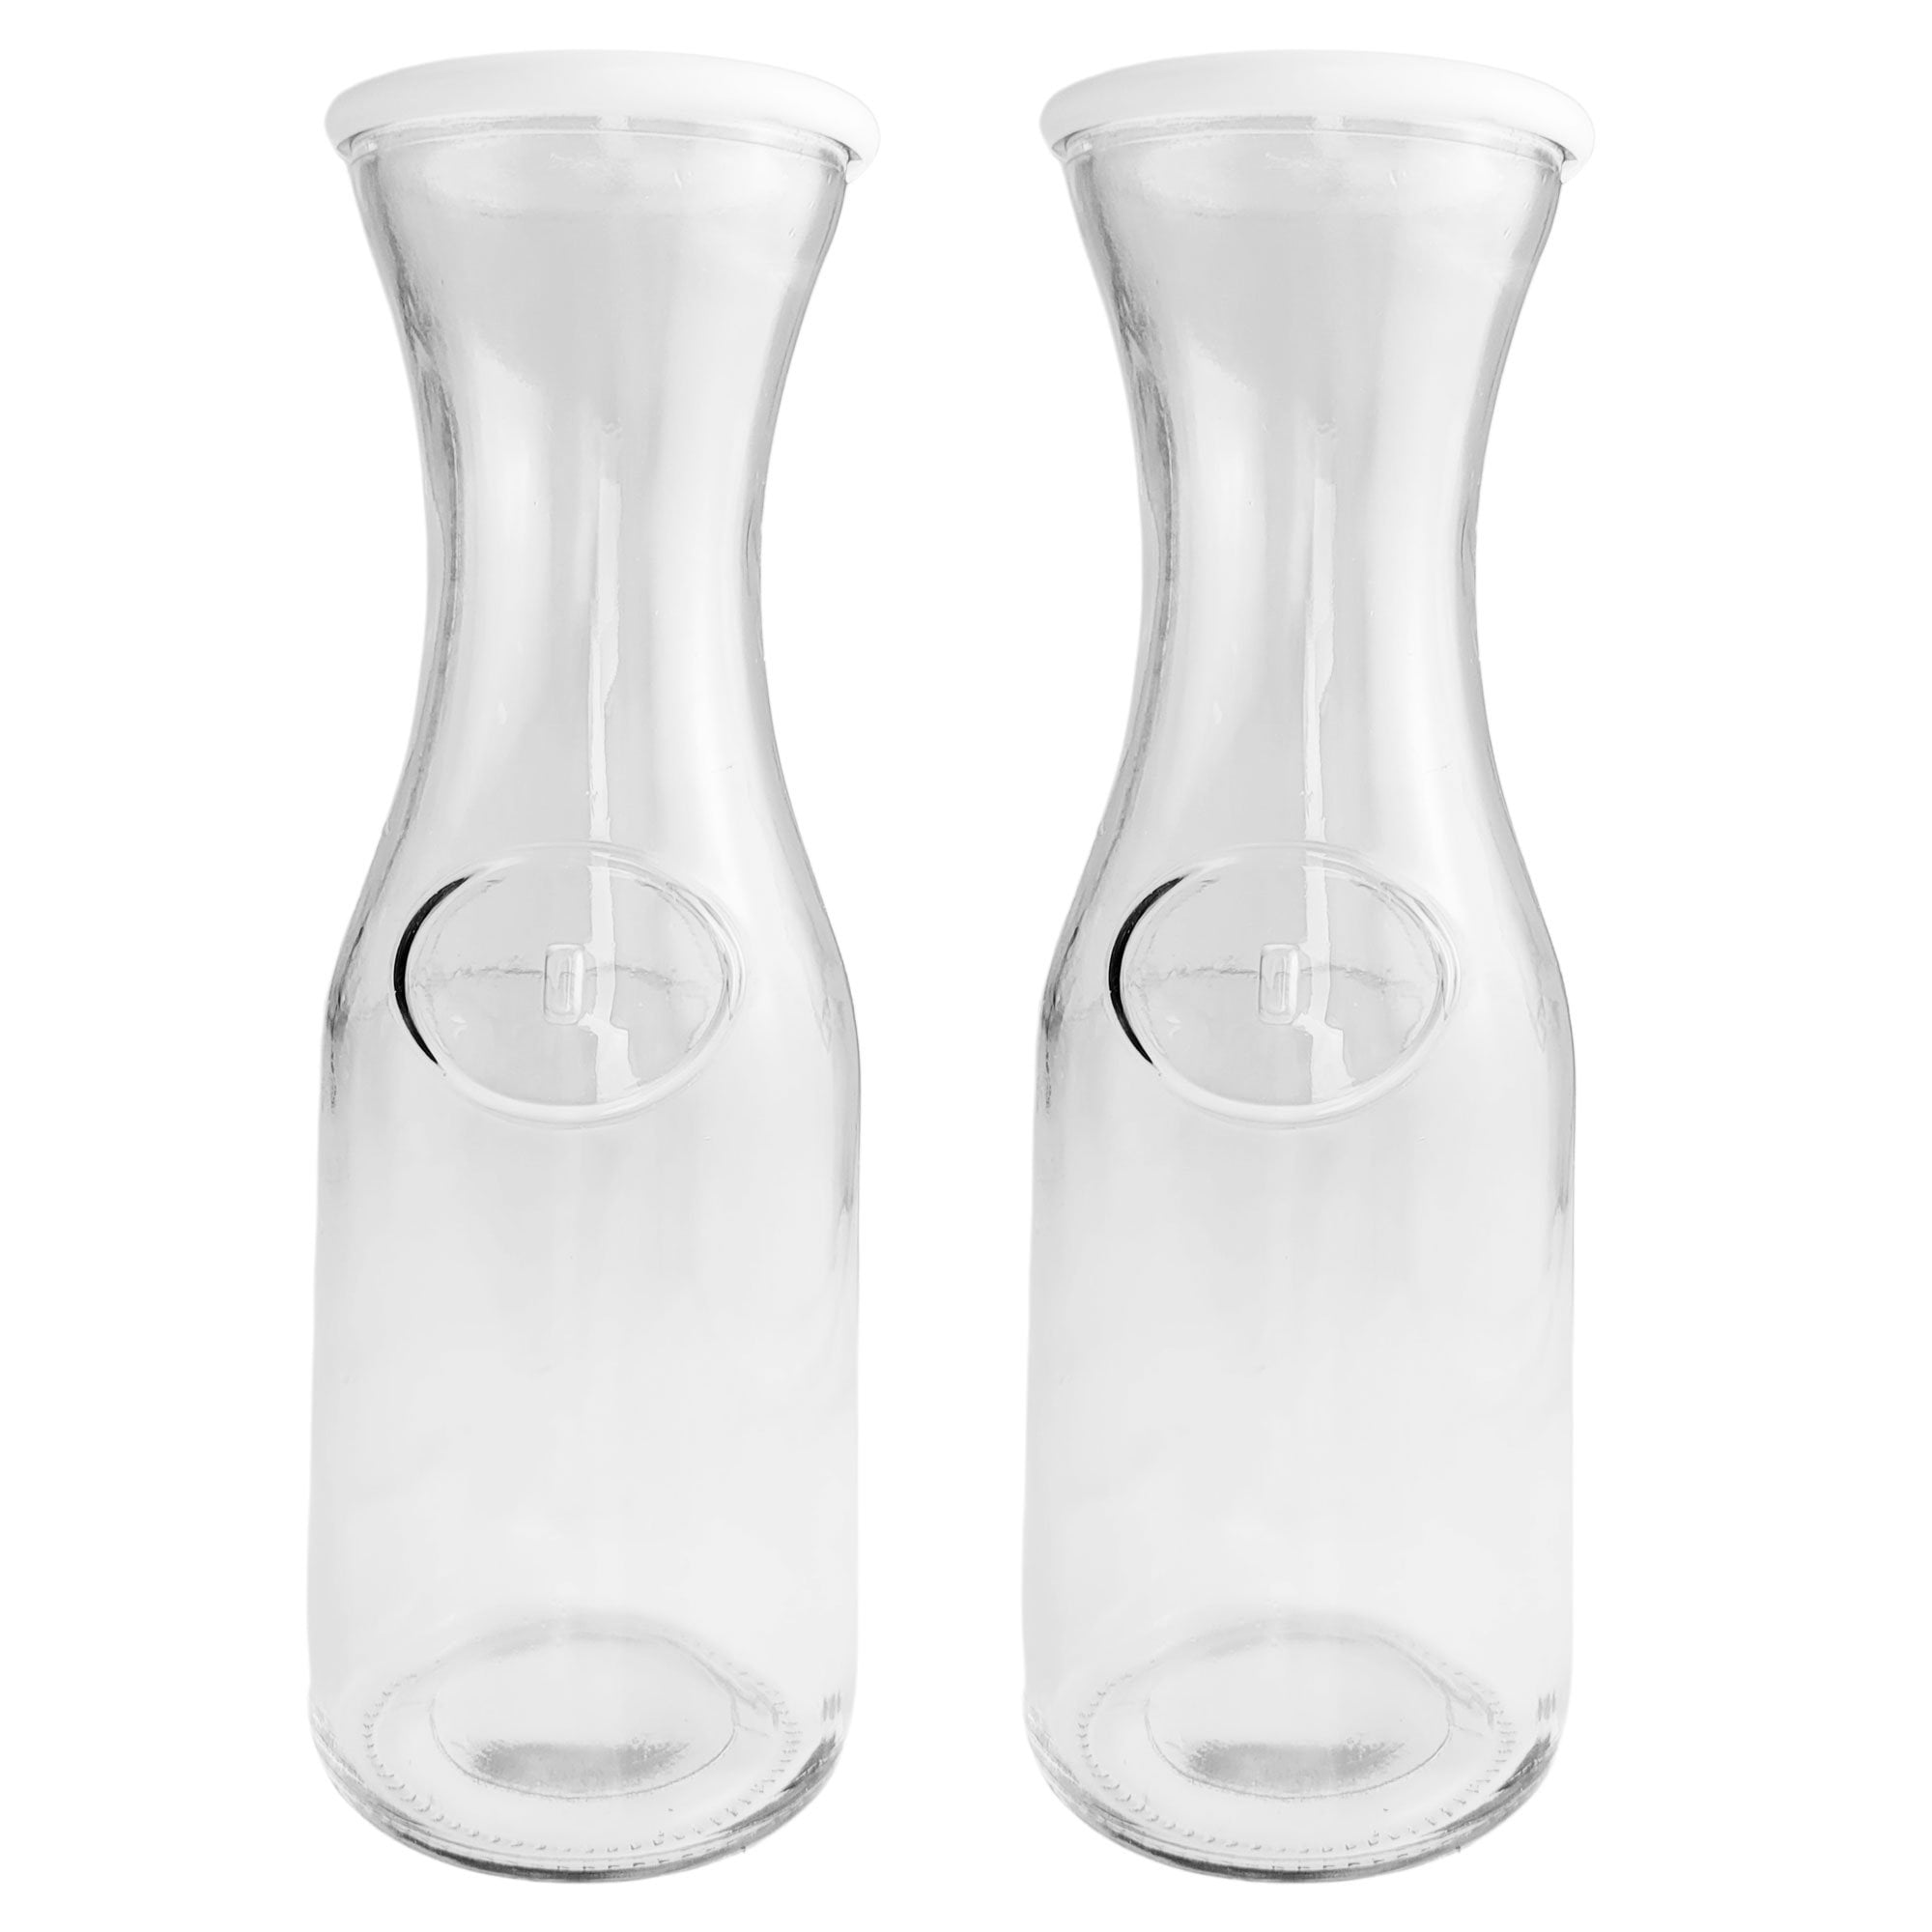 Great for Parties and Events 500 ml Glass Carafe Kitchen Lux 1 Bottle The Love Drink Pitcher and Elegant Wine Decanter Wide Mouth for Classic Pouring Narrow Neck For Easy Grip 